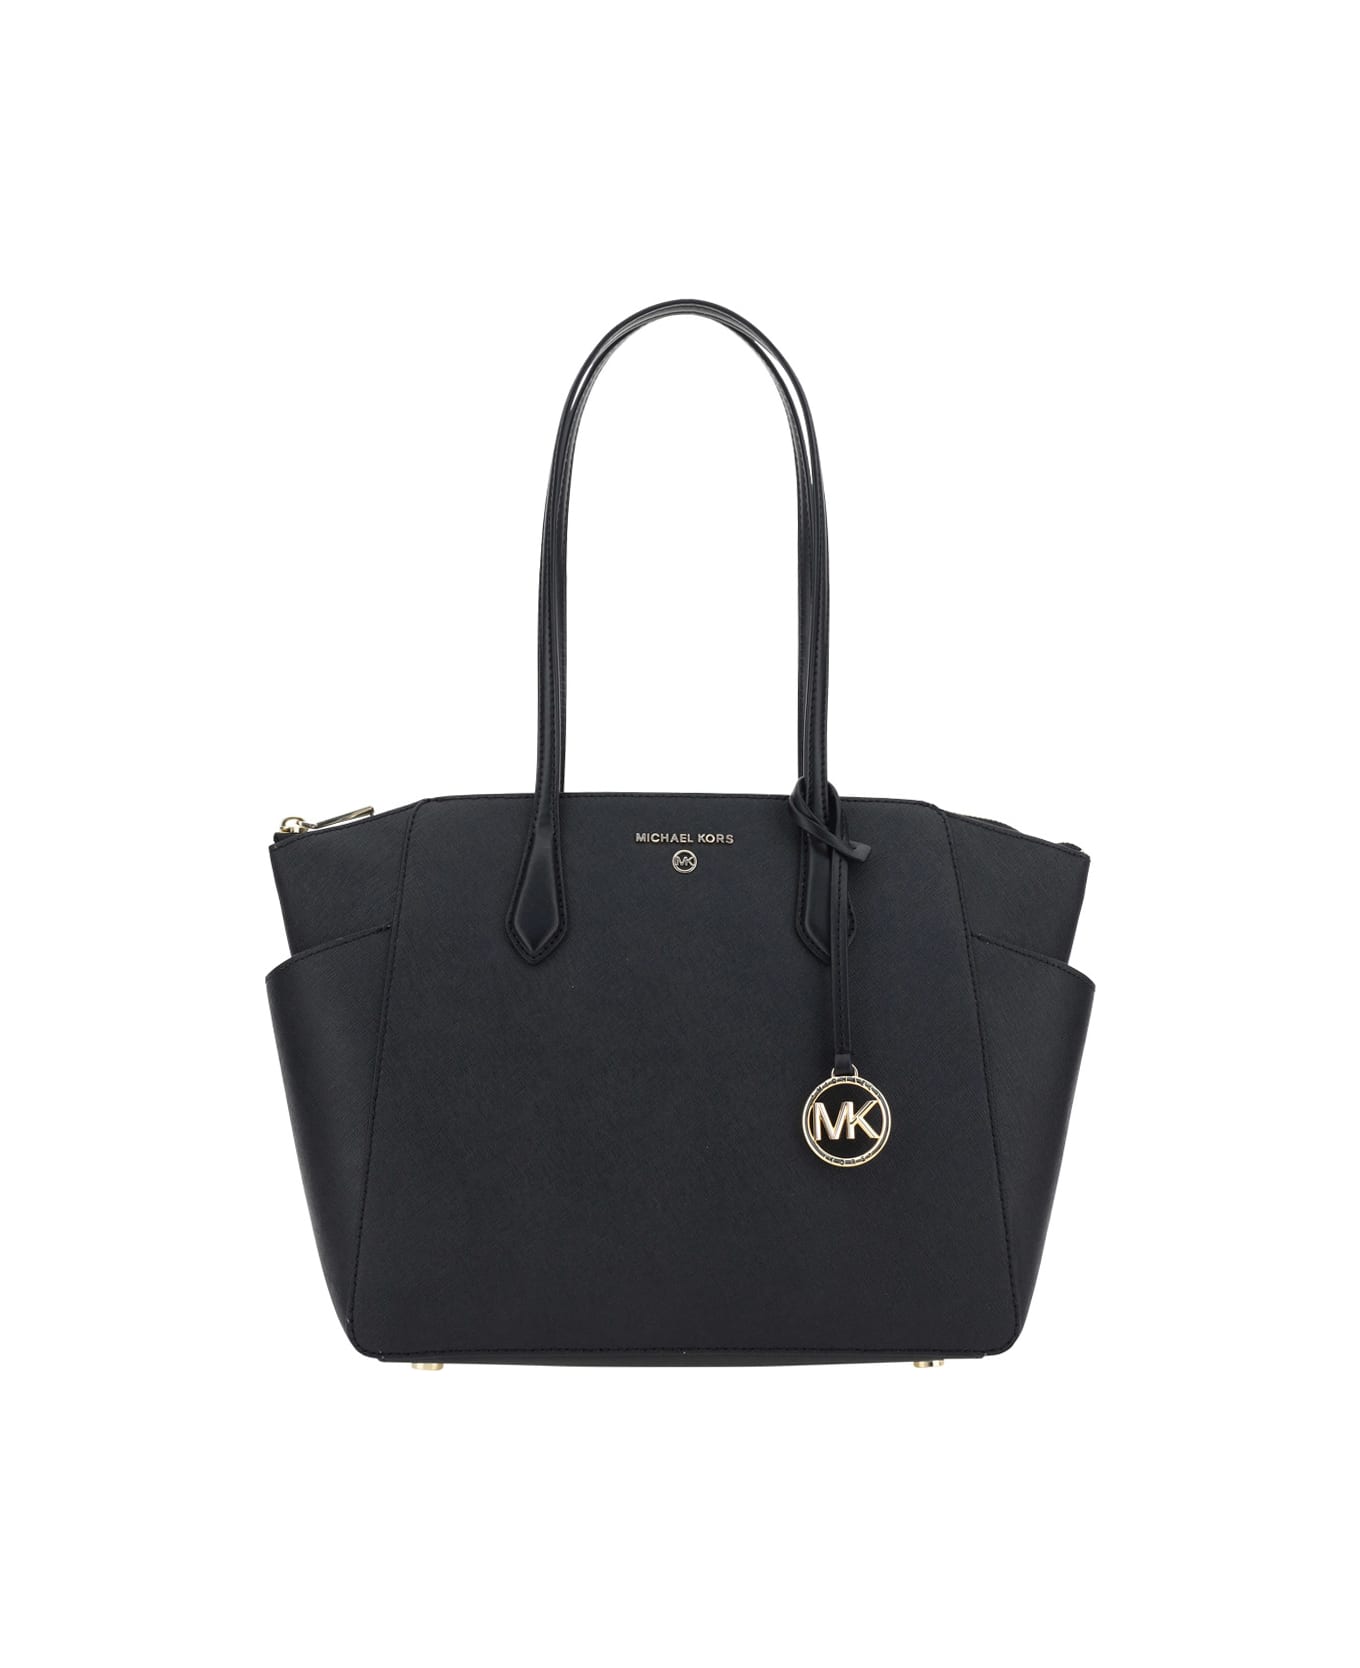 Michael Kors Marilyn Leather Tote - Black トートバッグ